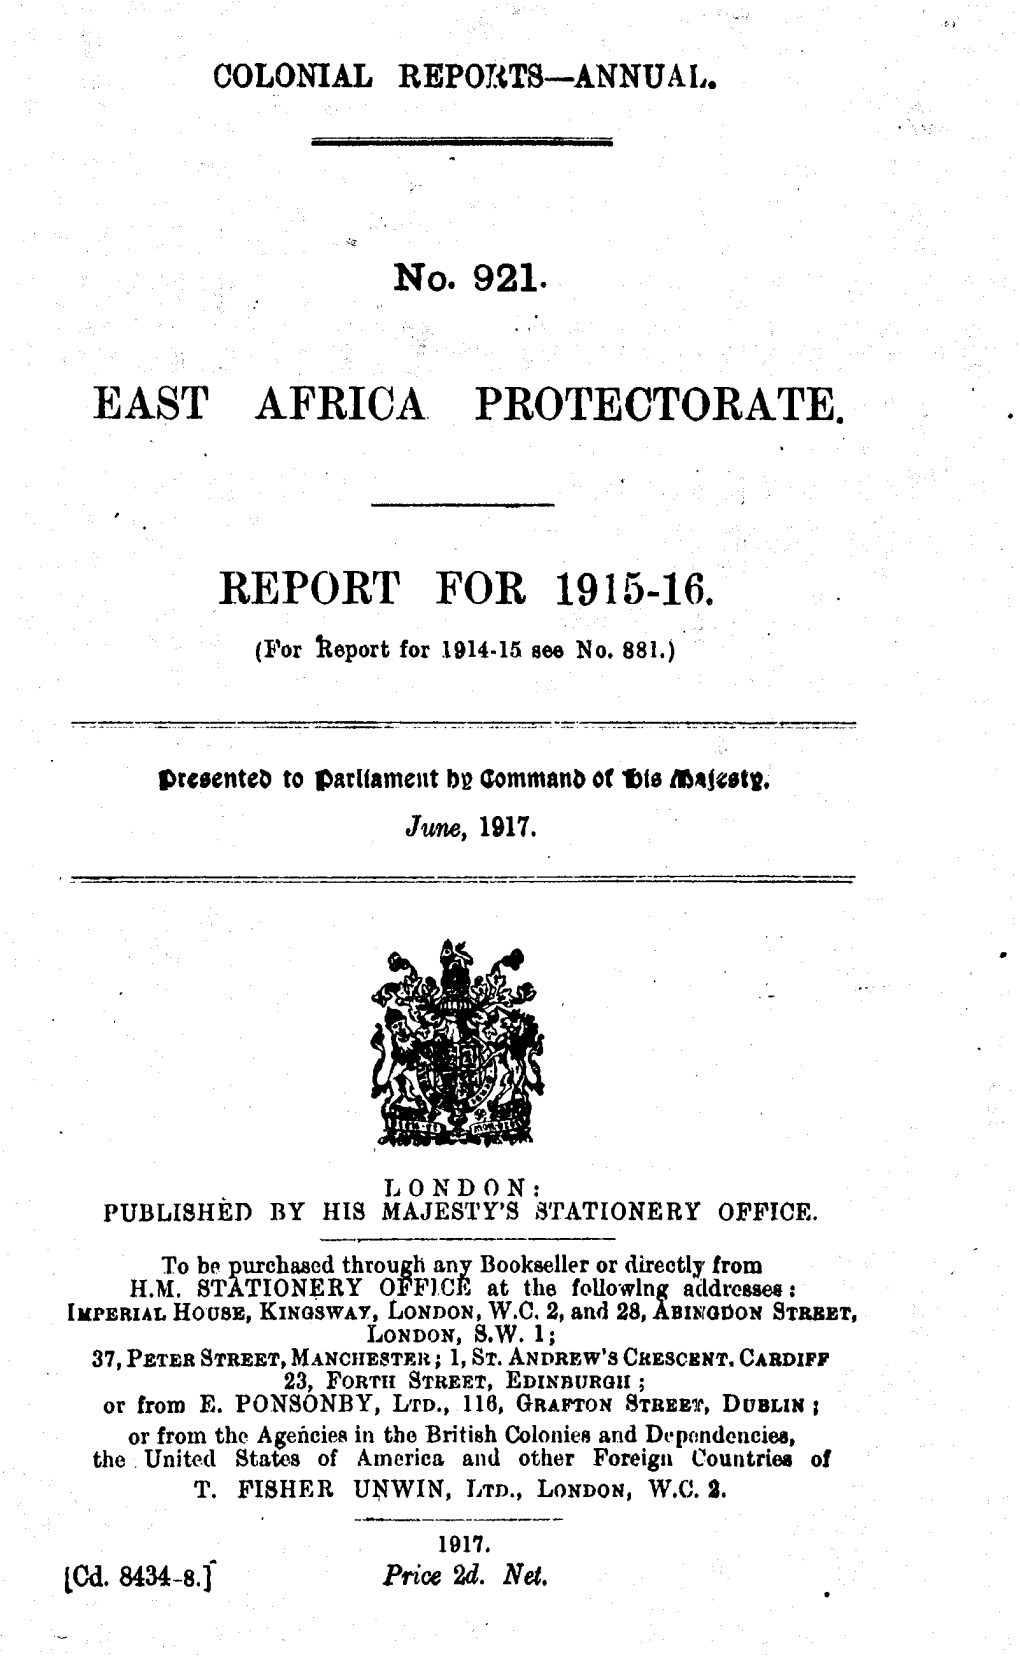 Annual Report of the Colonies, East Africa Protectorate, Kenya, 1915-16